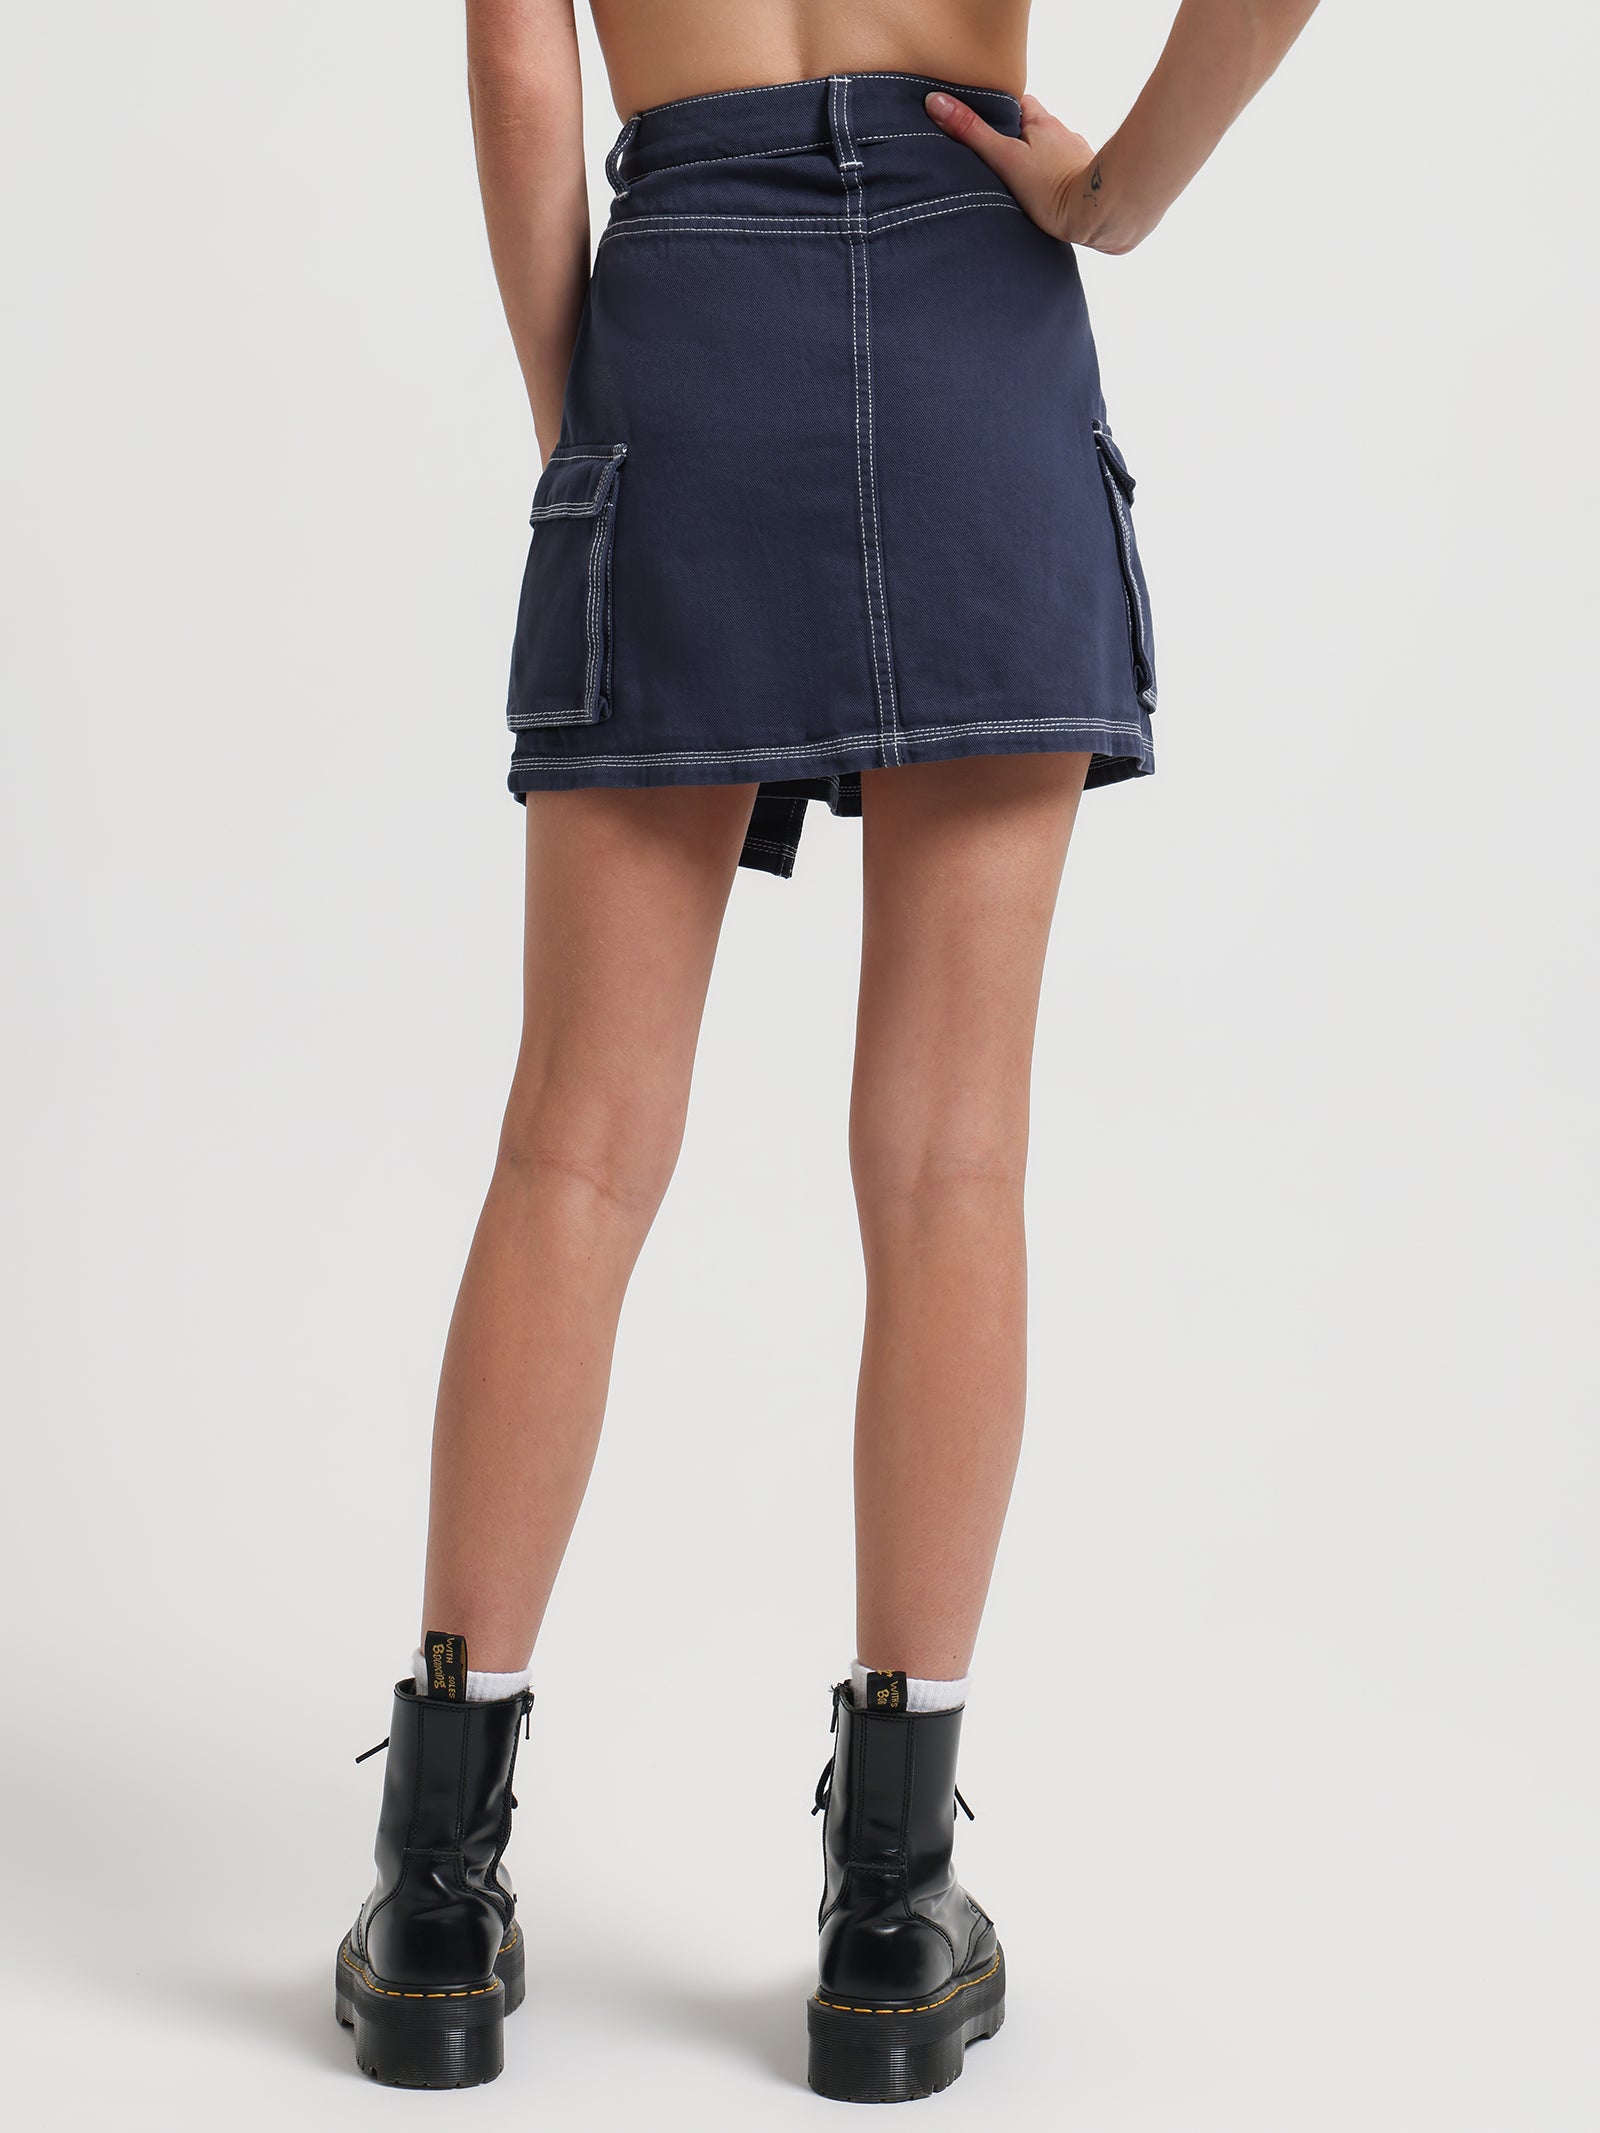 Shannon Pleated Skirt in Check - Glue Store